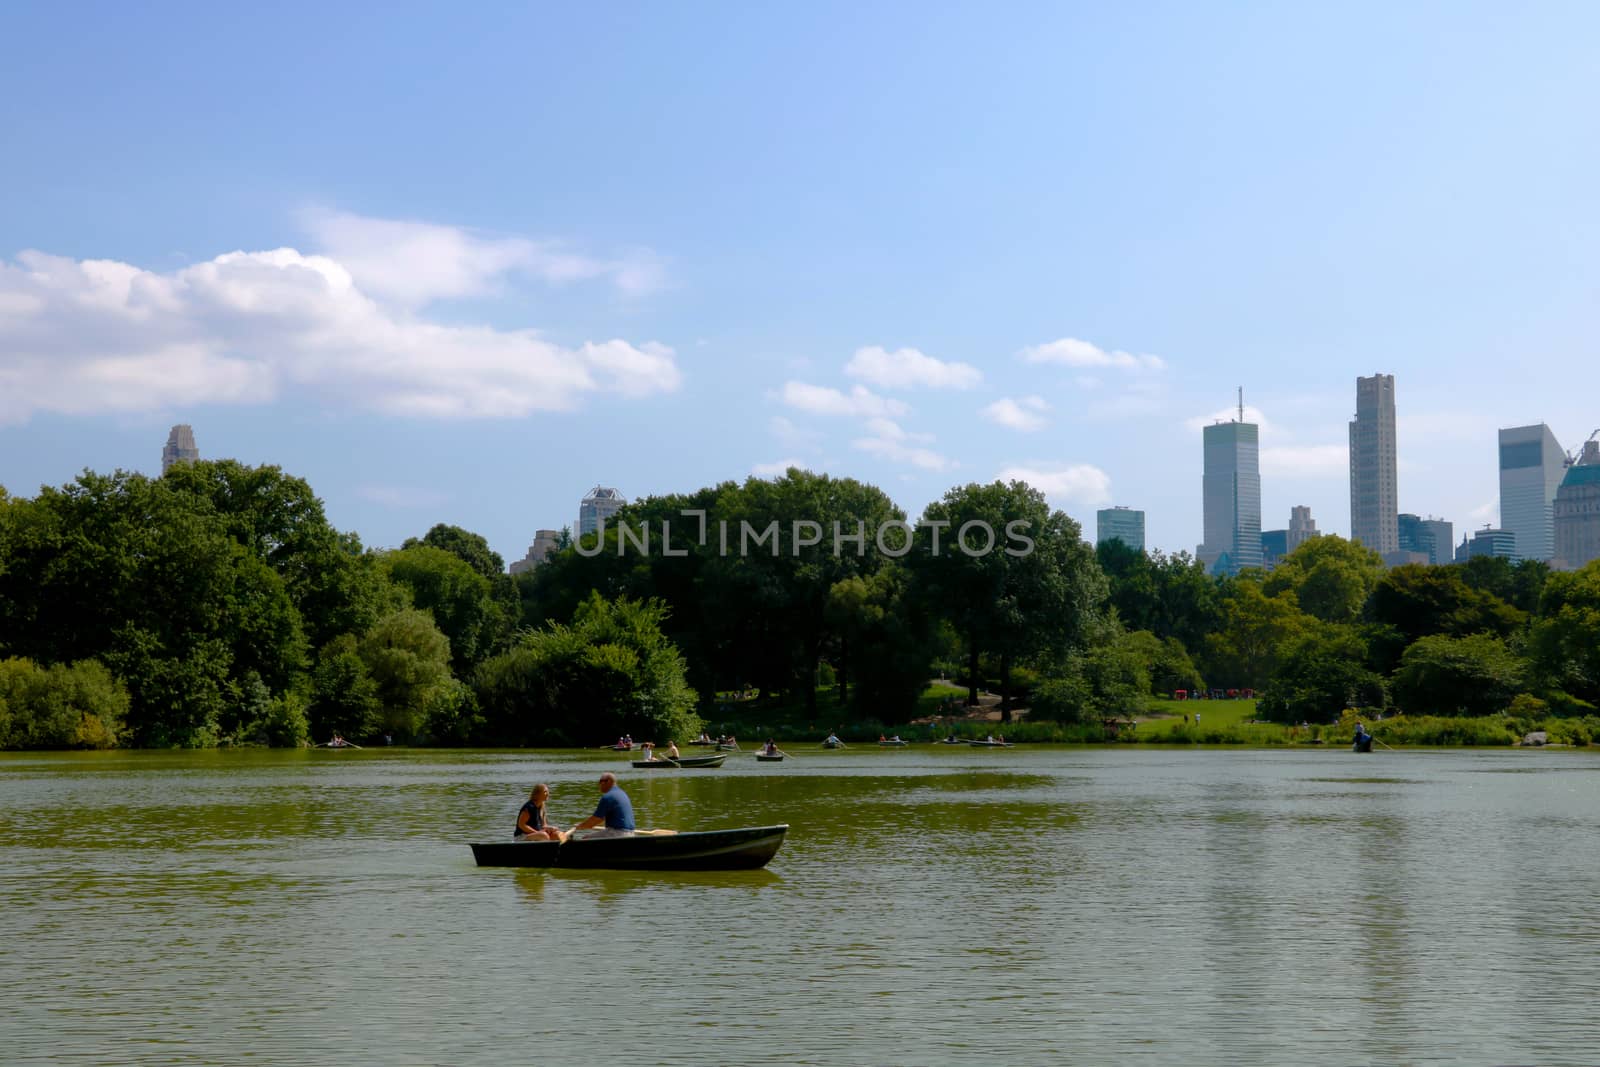 NEW YORK, USA - August 30, 2018: boat on the canal in Central Park, New York City, USA